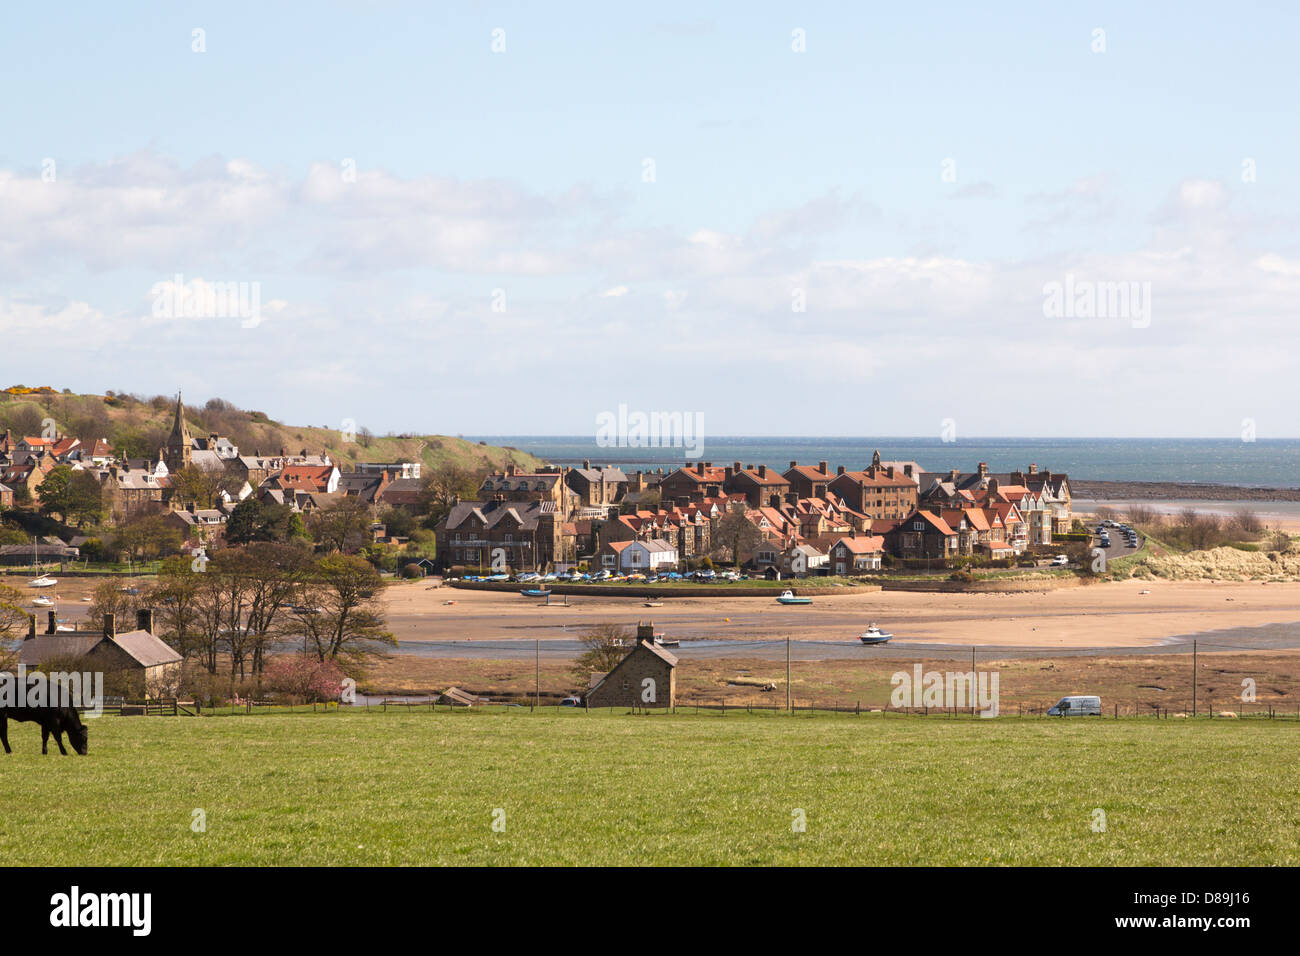 Alnmouth seafront, Alnwick, Northumberland. Stock Photo